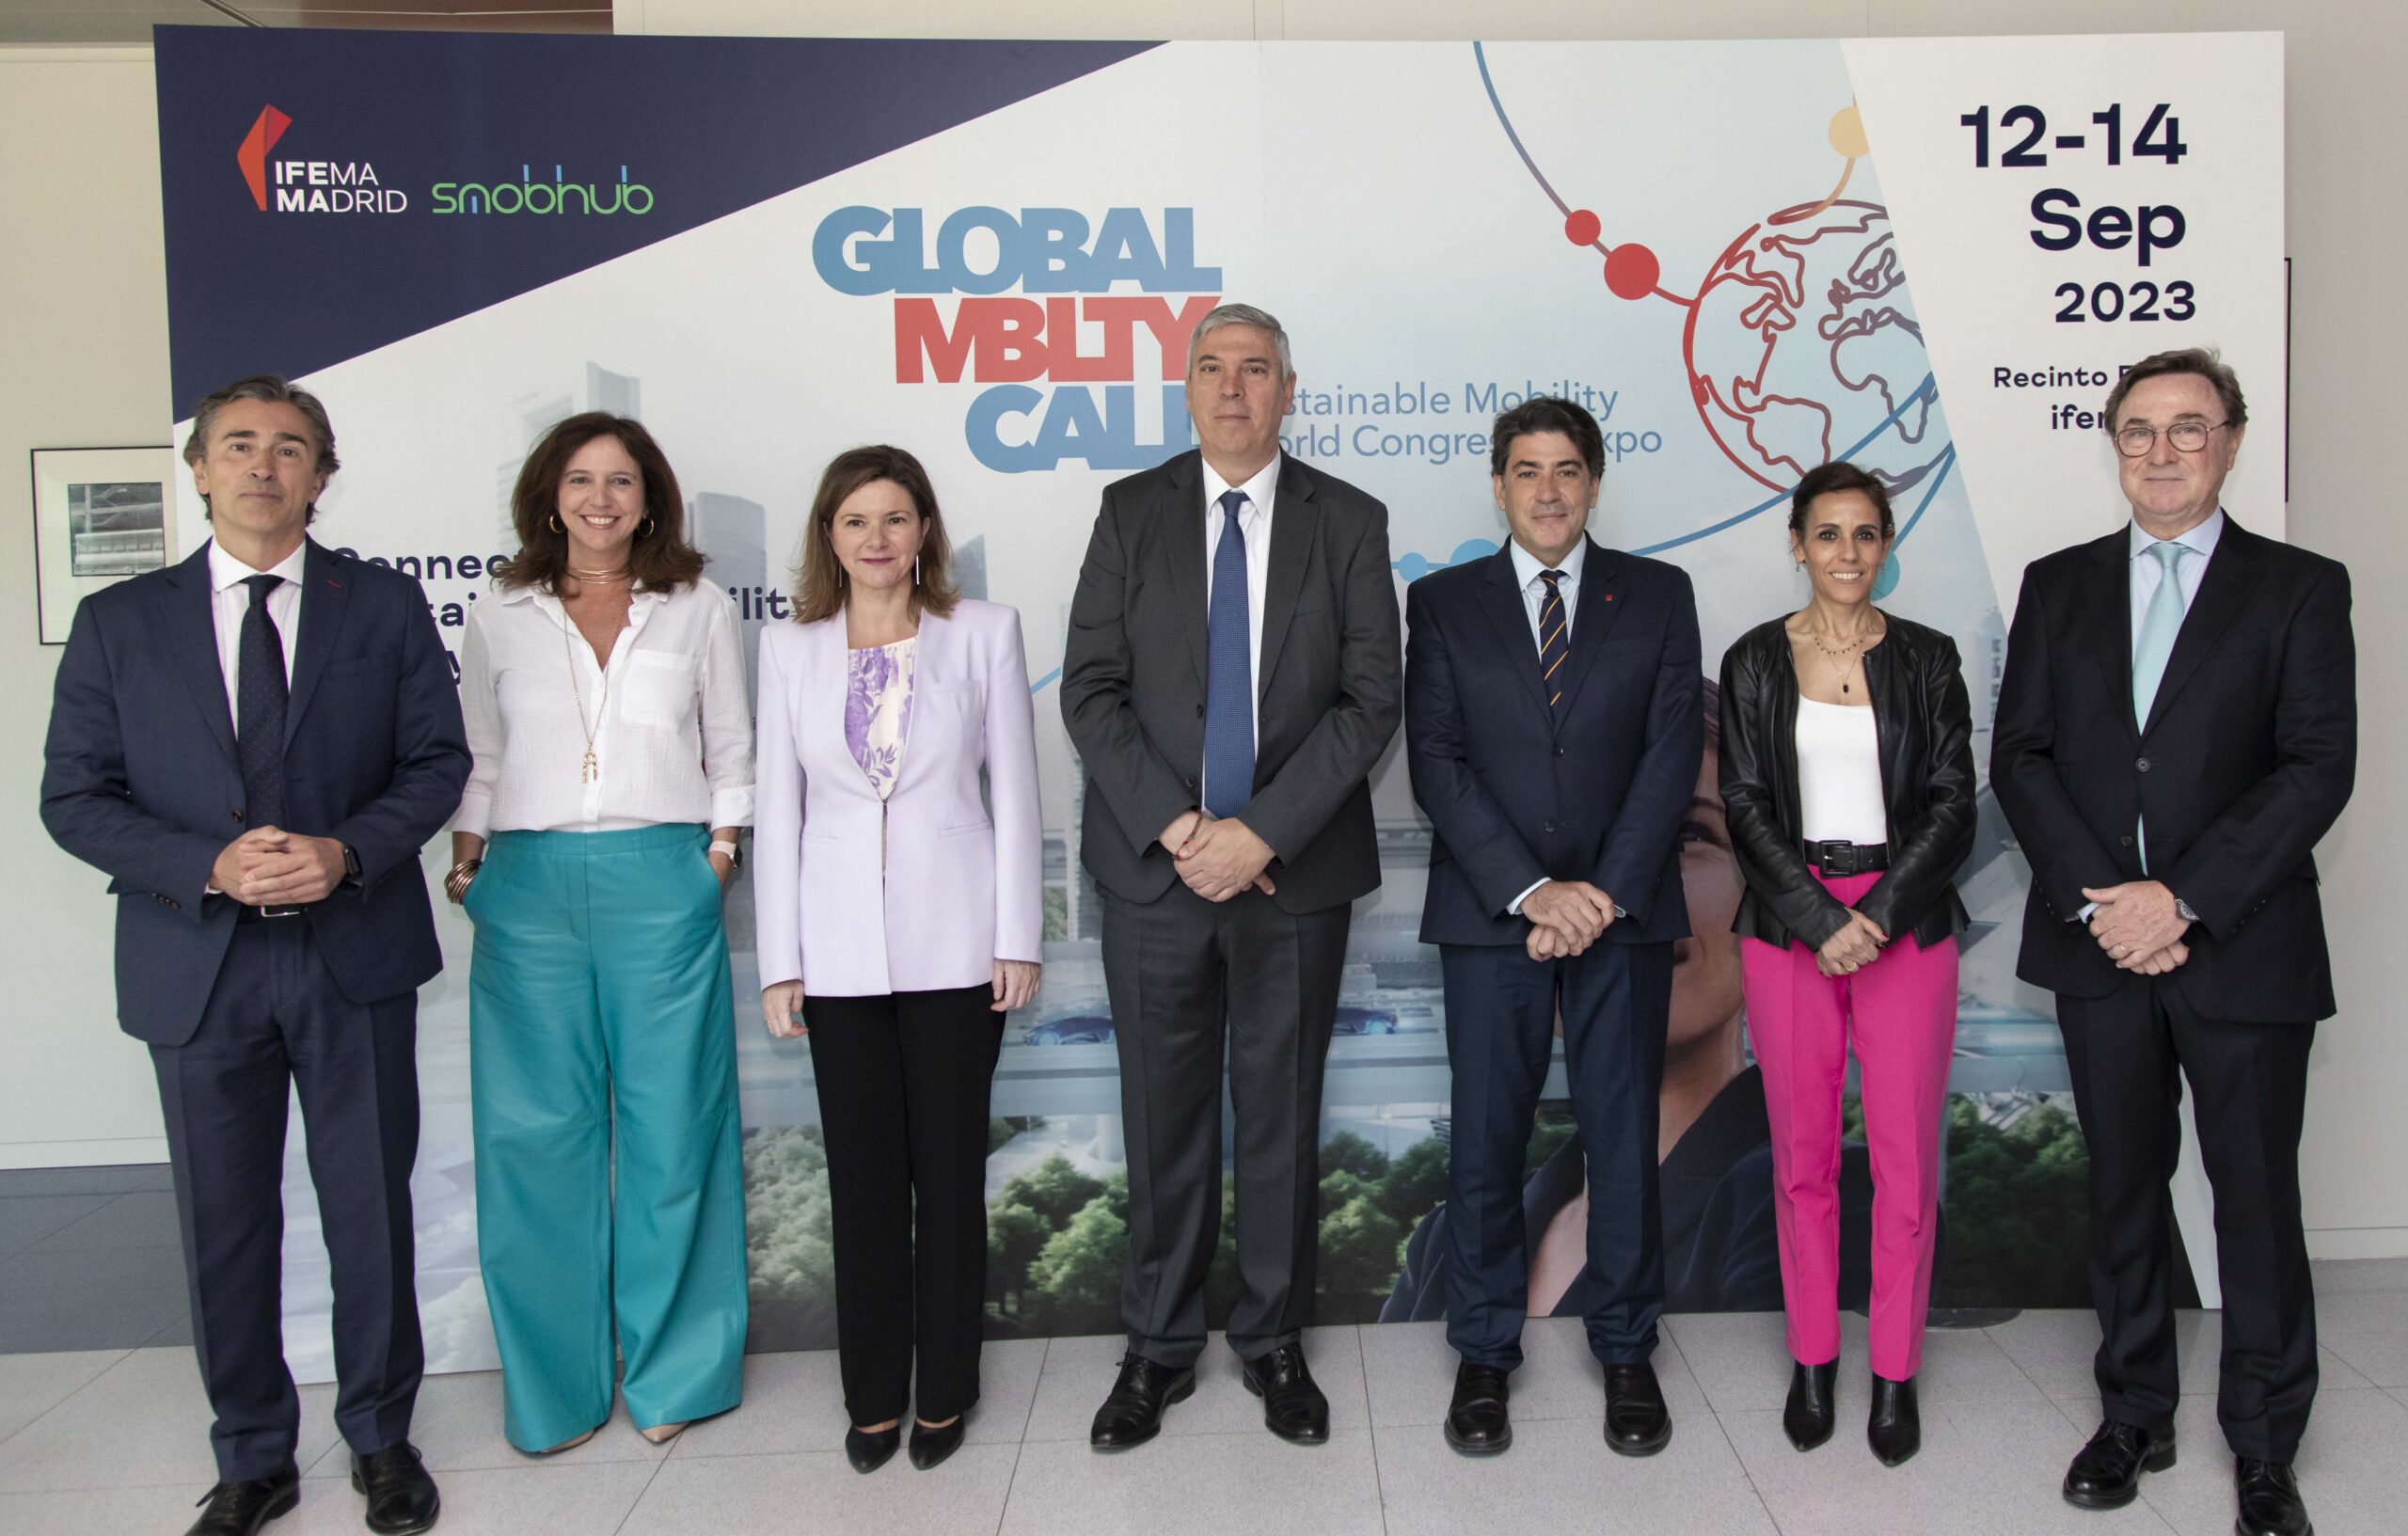 Global Mobility Call, from left to right, David Moneo, Director of Global Mobility Call; Arancha Priede, Business Director of IFEMA Madrid; María José Rallo, Secretary General for Transport and Mobility; José Vicente de los Mozos, President of the Executive Committee of IFEMA Madrid; David Pérez, Minister of Transport and Infrastructures; Silvia Roldán, President of Metro de Madrid, and Juan José Lillo, co-founder of Smobhub. 